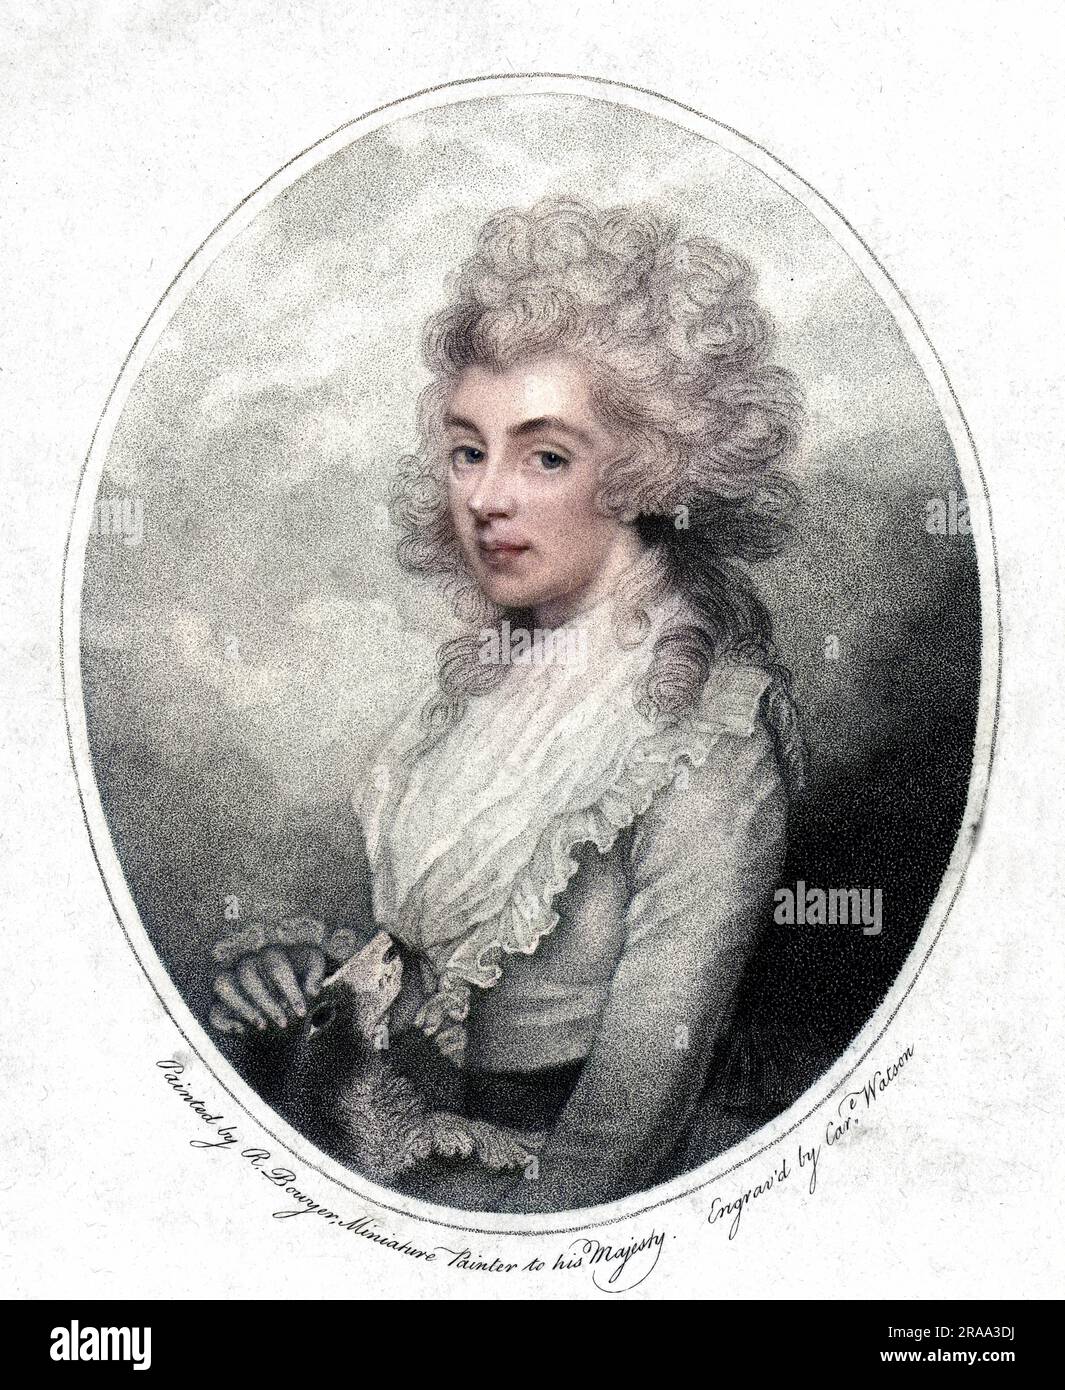 MARY AMELIA (nee Hill) countess, and later marchioness of SALIBURY wife of James Cecil, first marquess     Date: 1750 - 1835 Stock Photo